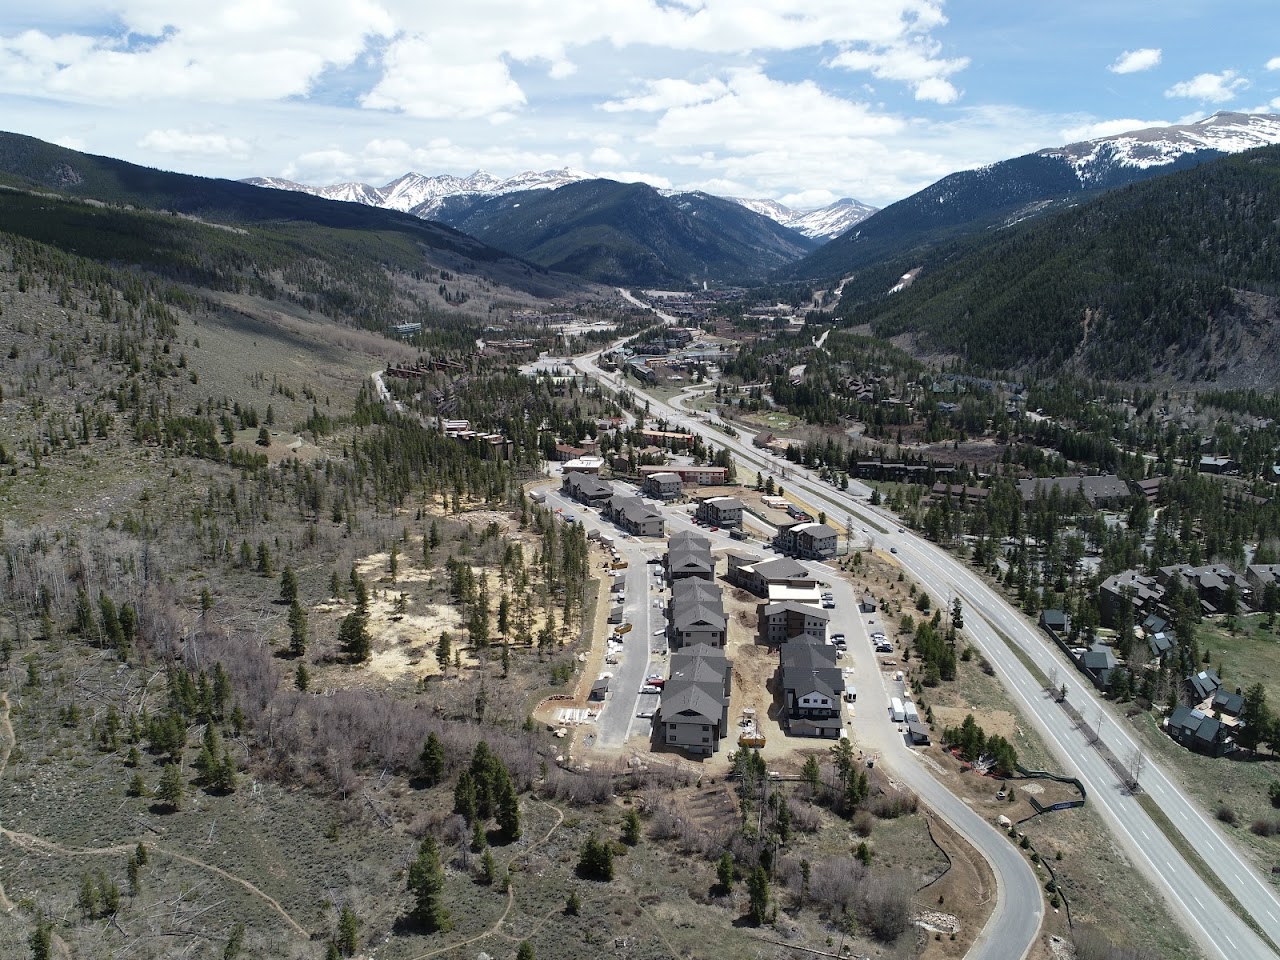 Photo of WINTERGREEN WEST. Affordable housing located at 0235 ANTLERS GULCH RD KEYSTONE, CO 80435